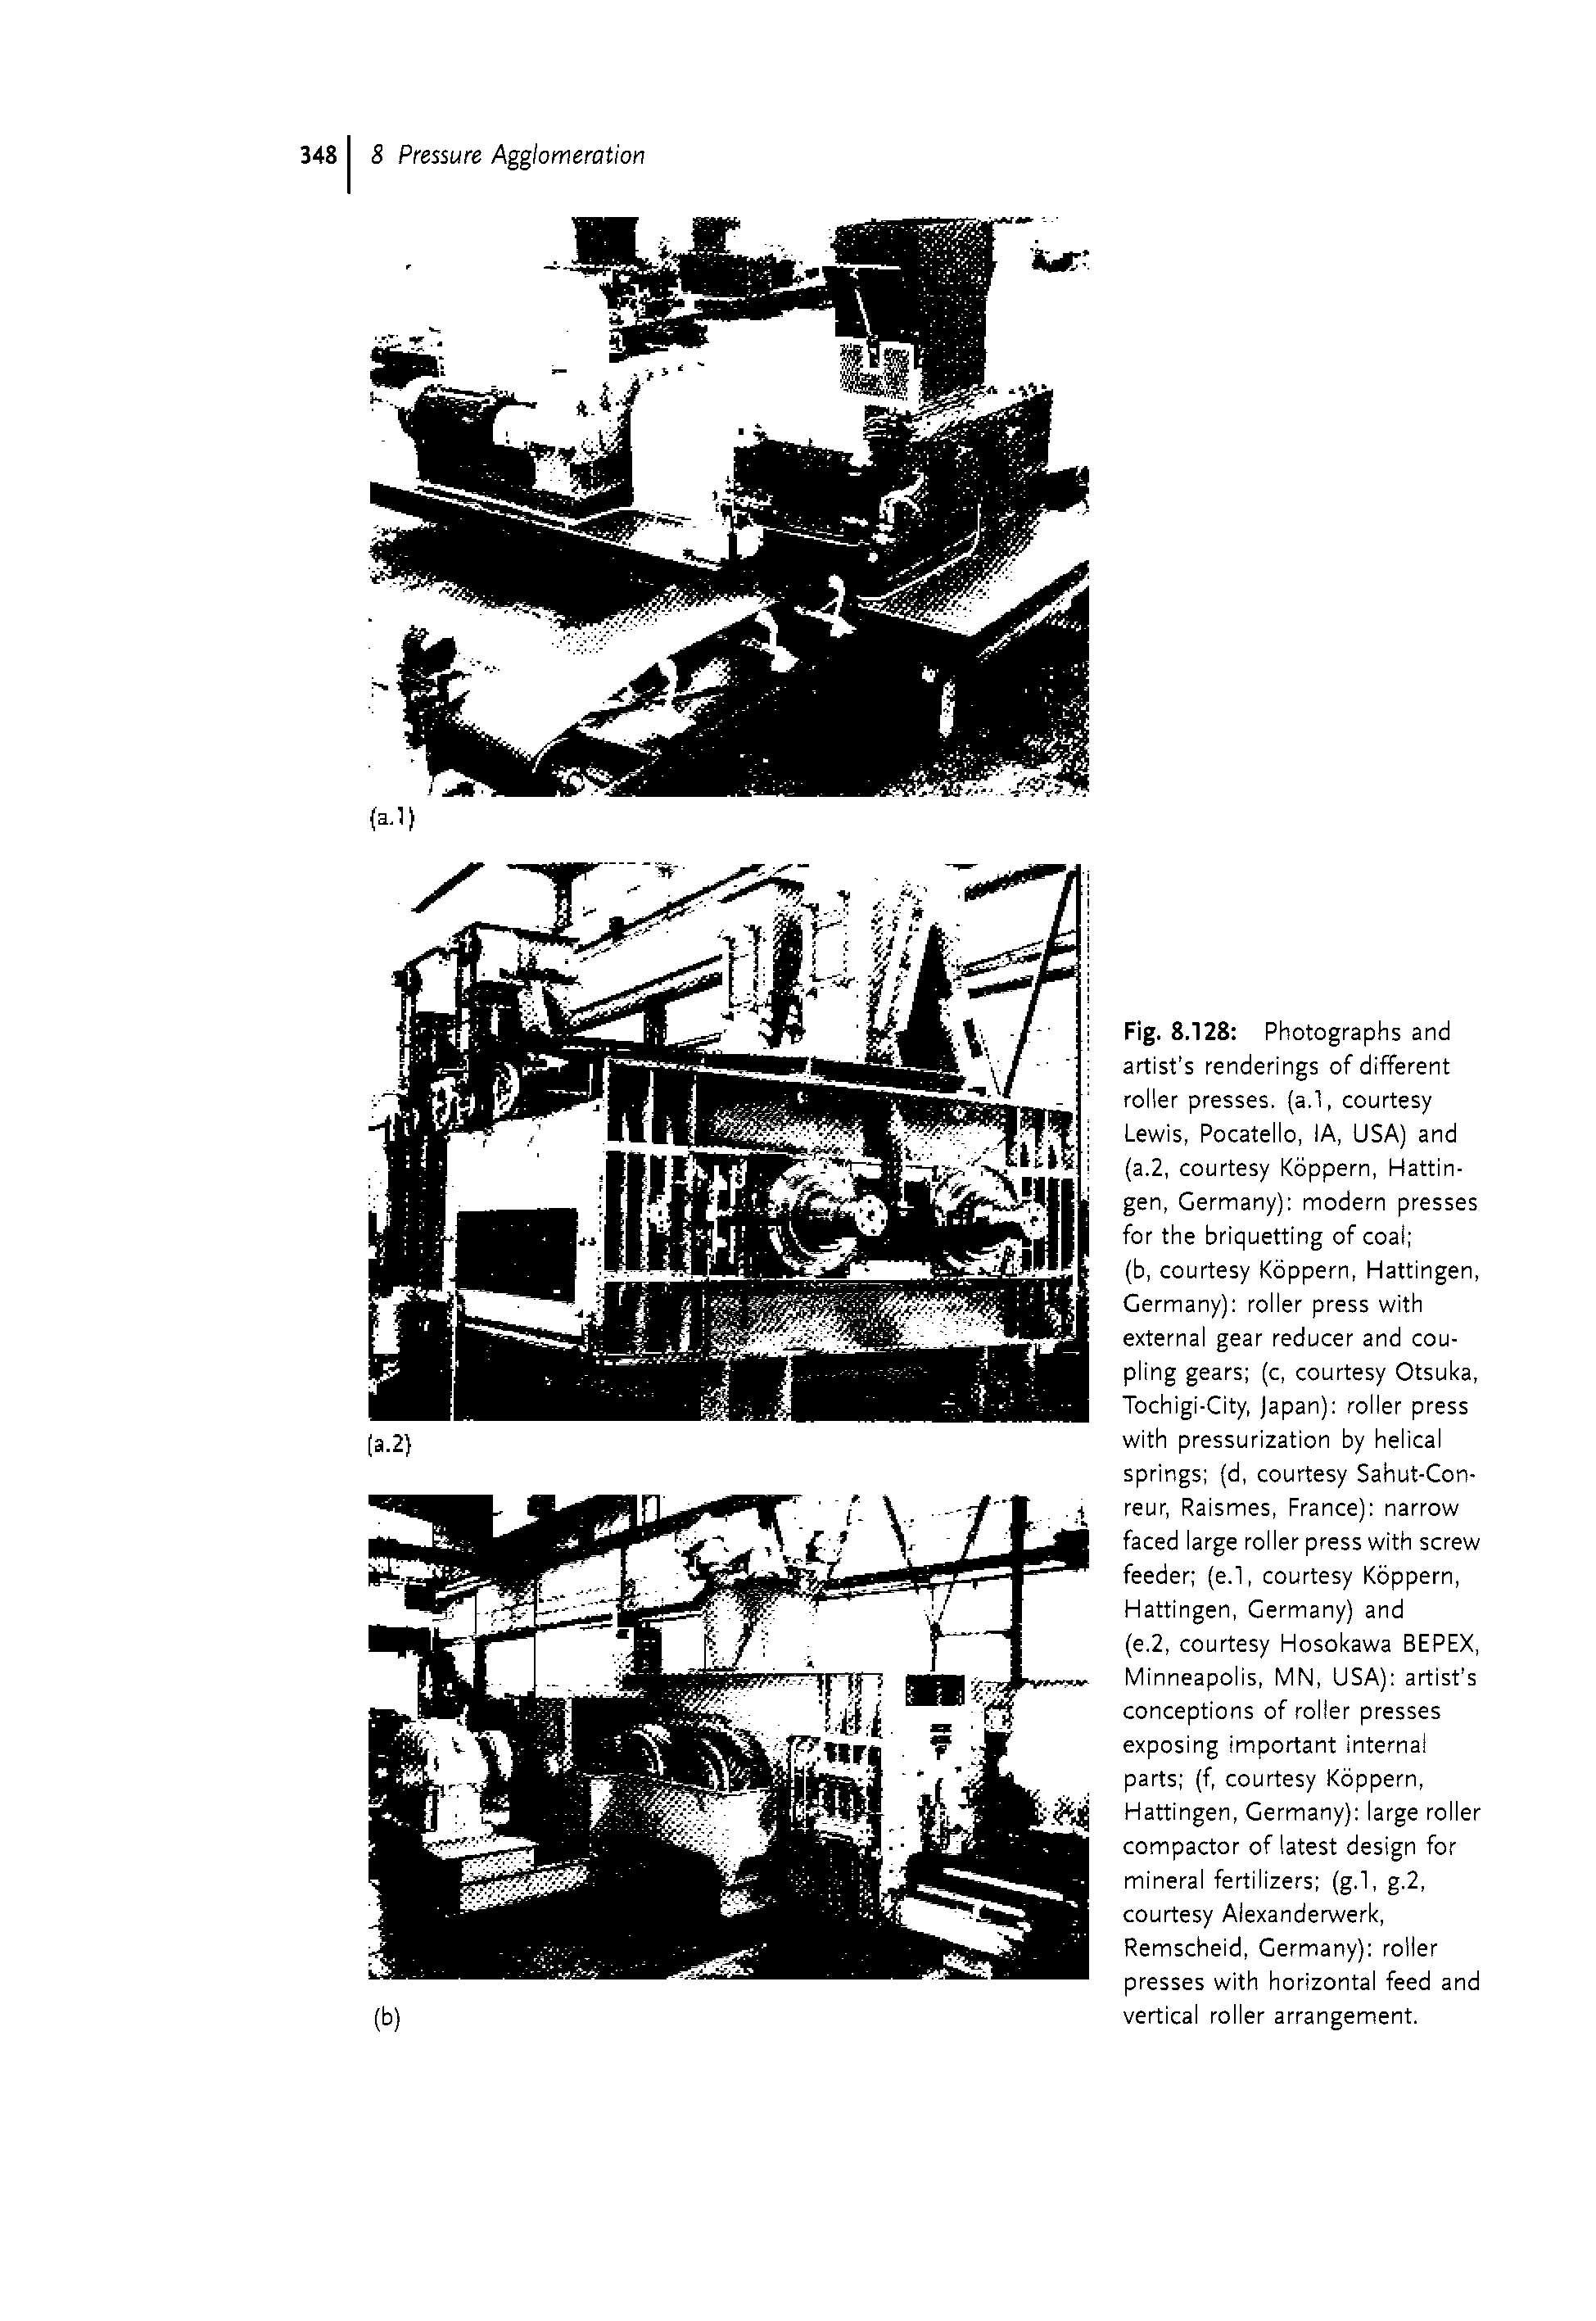 Fig. 8.128 Photographs and artist s renderings of different roller presses, (a.l, courtesy Lewis, Pocatello, lA, USA) and (a.2, courtesy Koppern, Hattin-gen, Germany) modern presses for the briquetting of coal ...